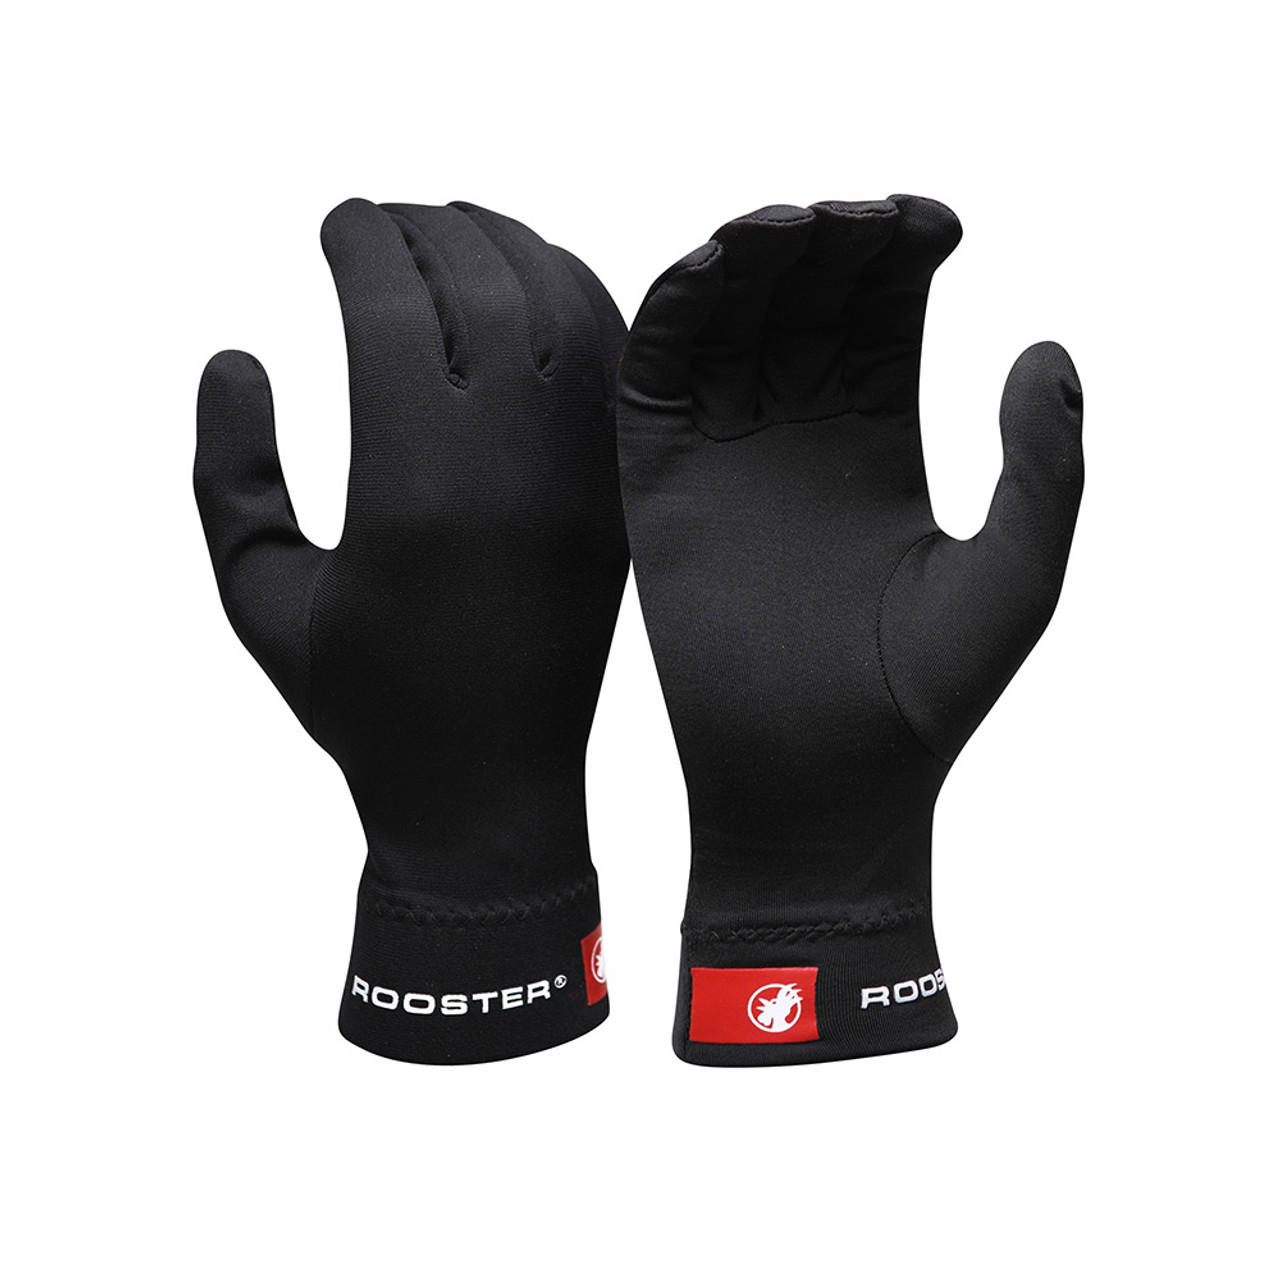 Polypro Glove Liner xs\/s